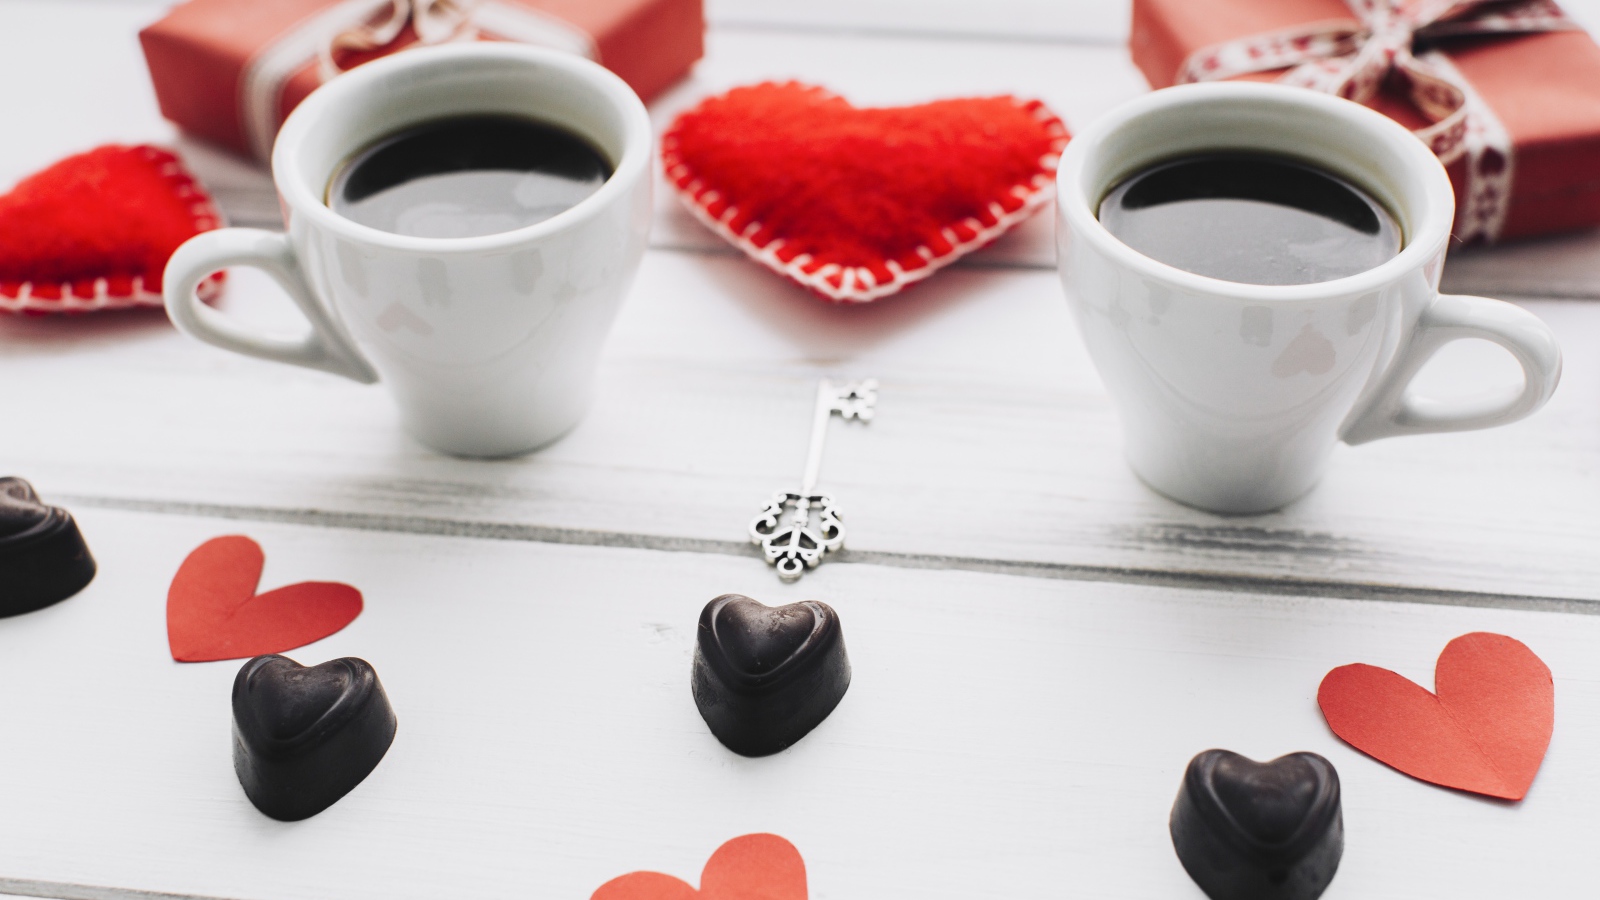 Two cups of coffee on the table with gifts, sweets and hearts